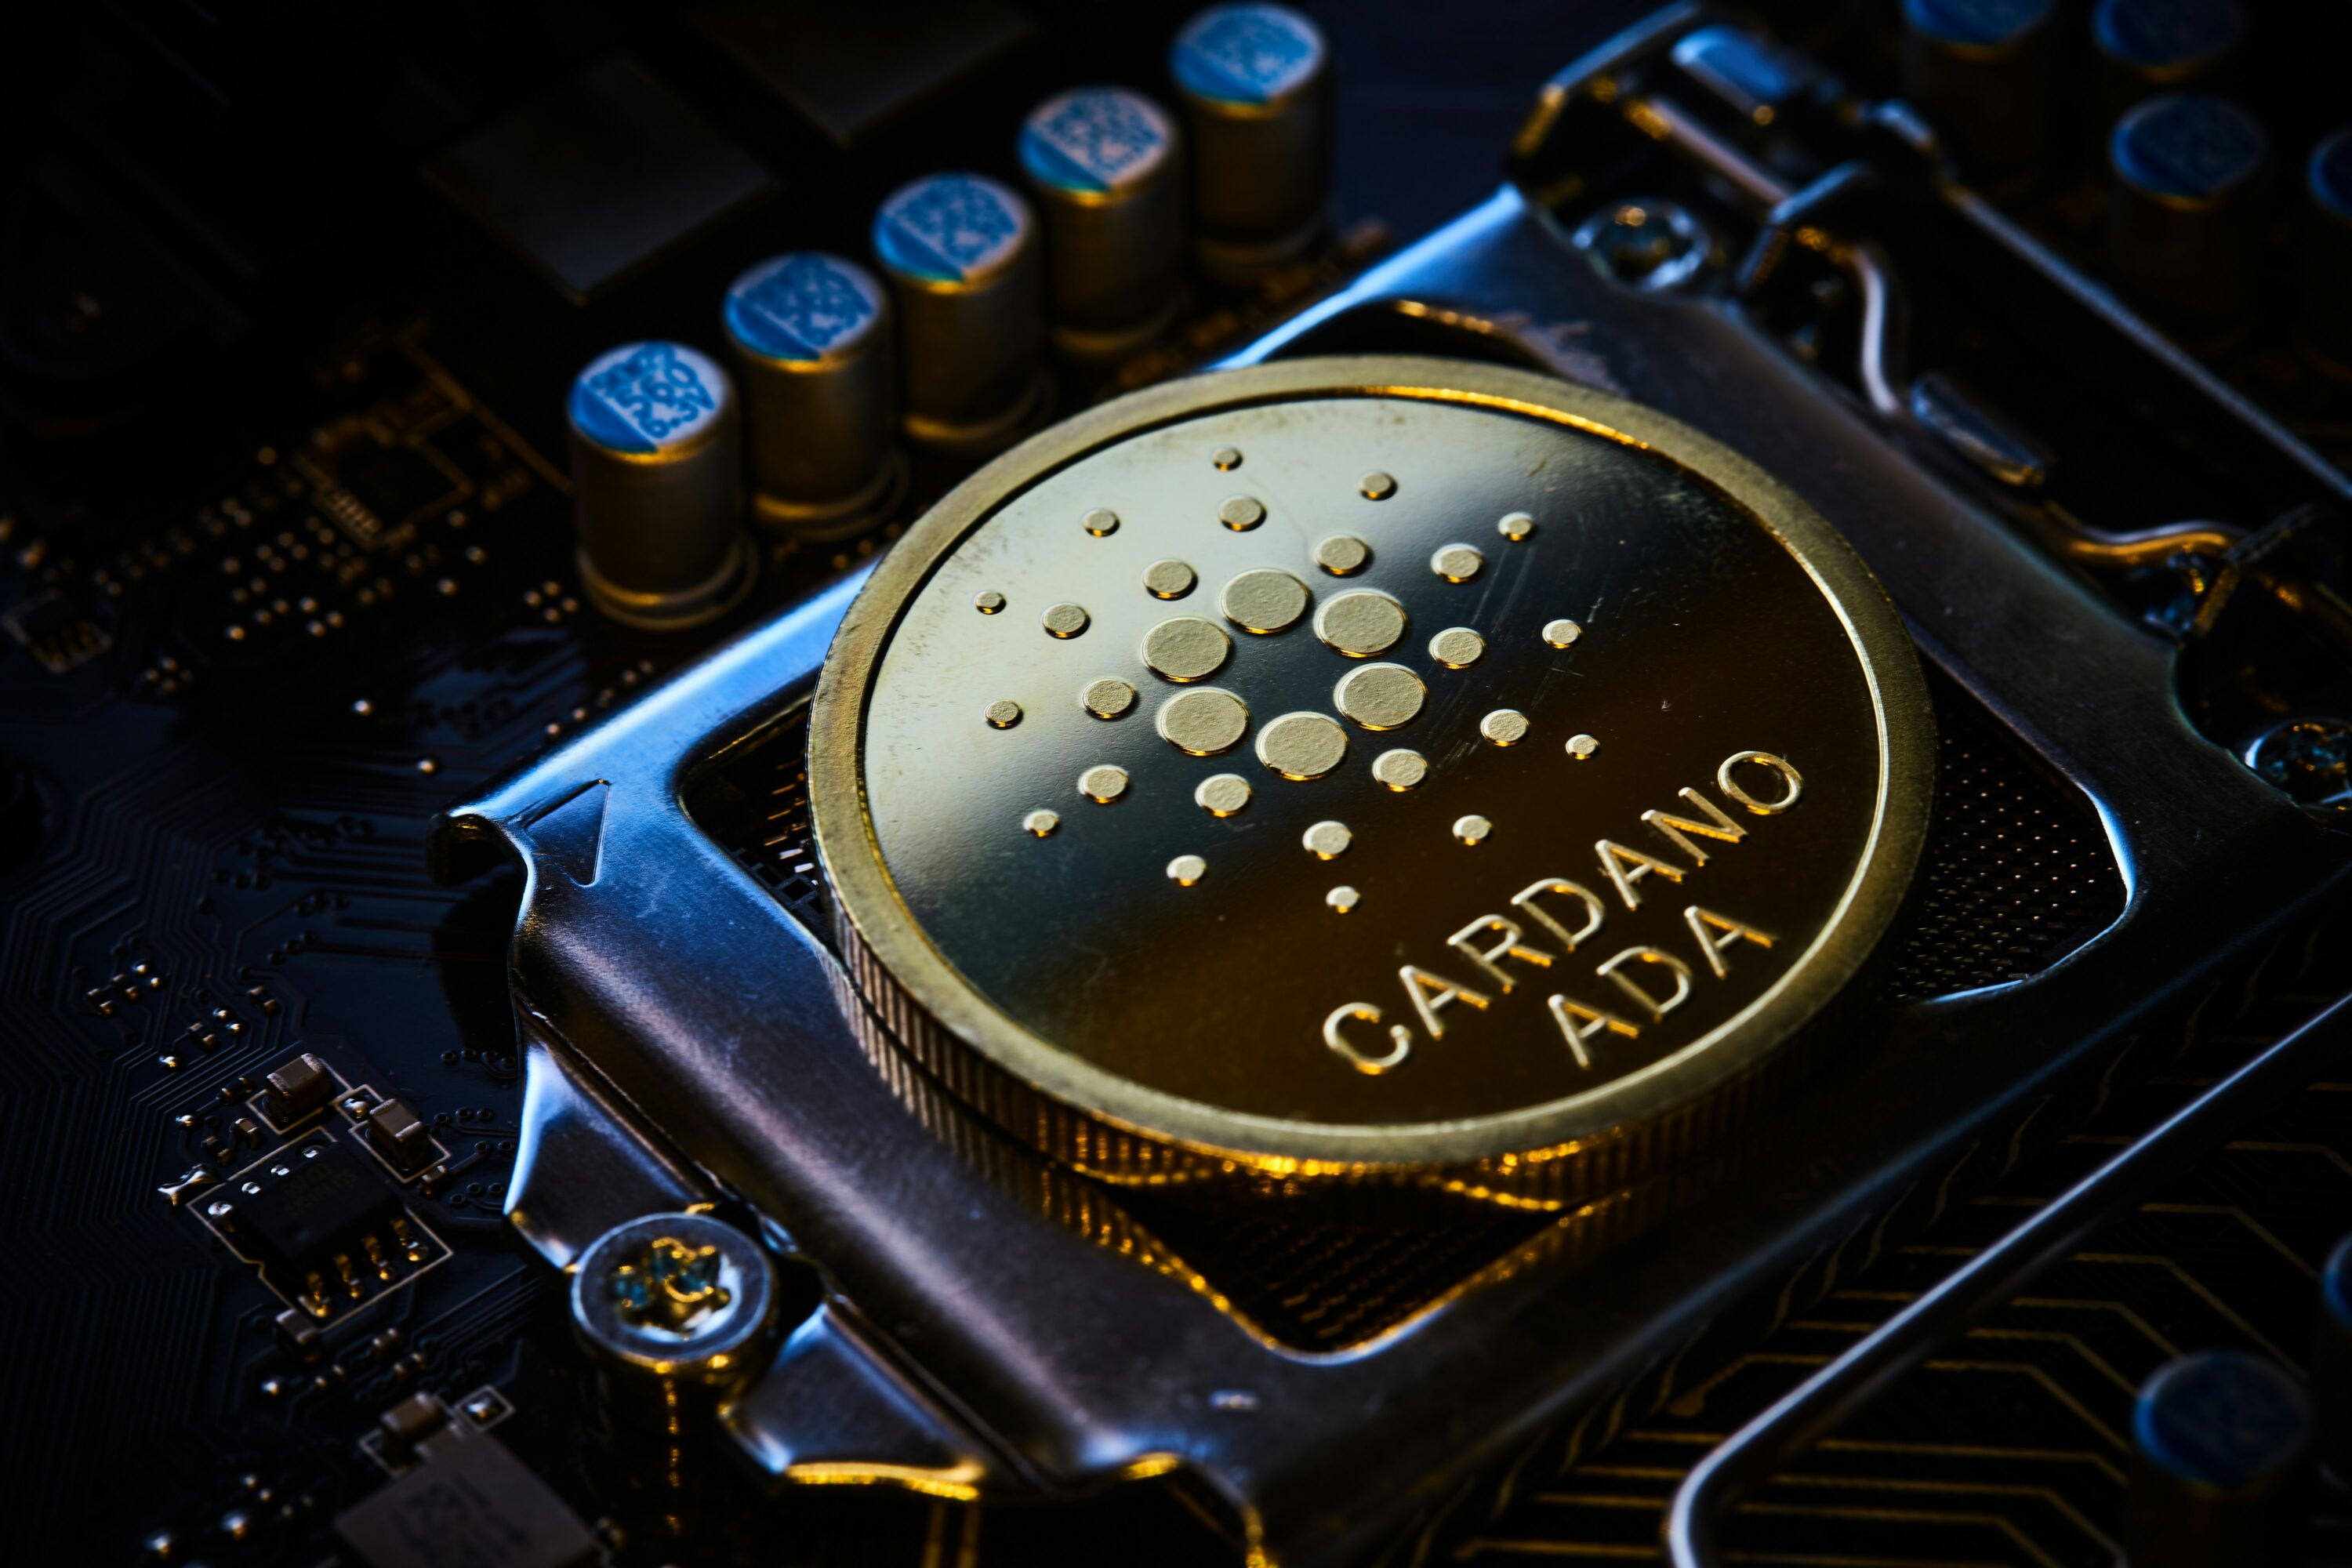 Will Cardano’s Chang Hard Fork trigger a new ADA rally?